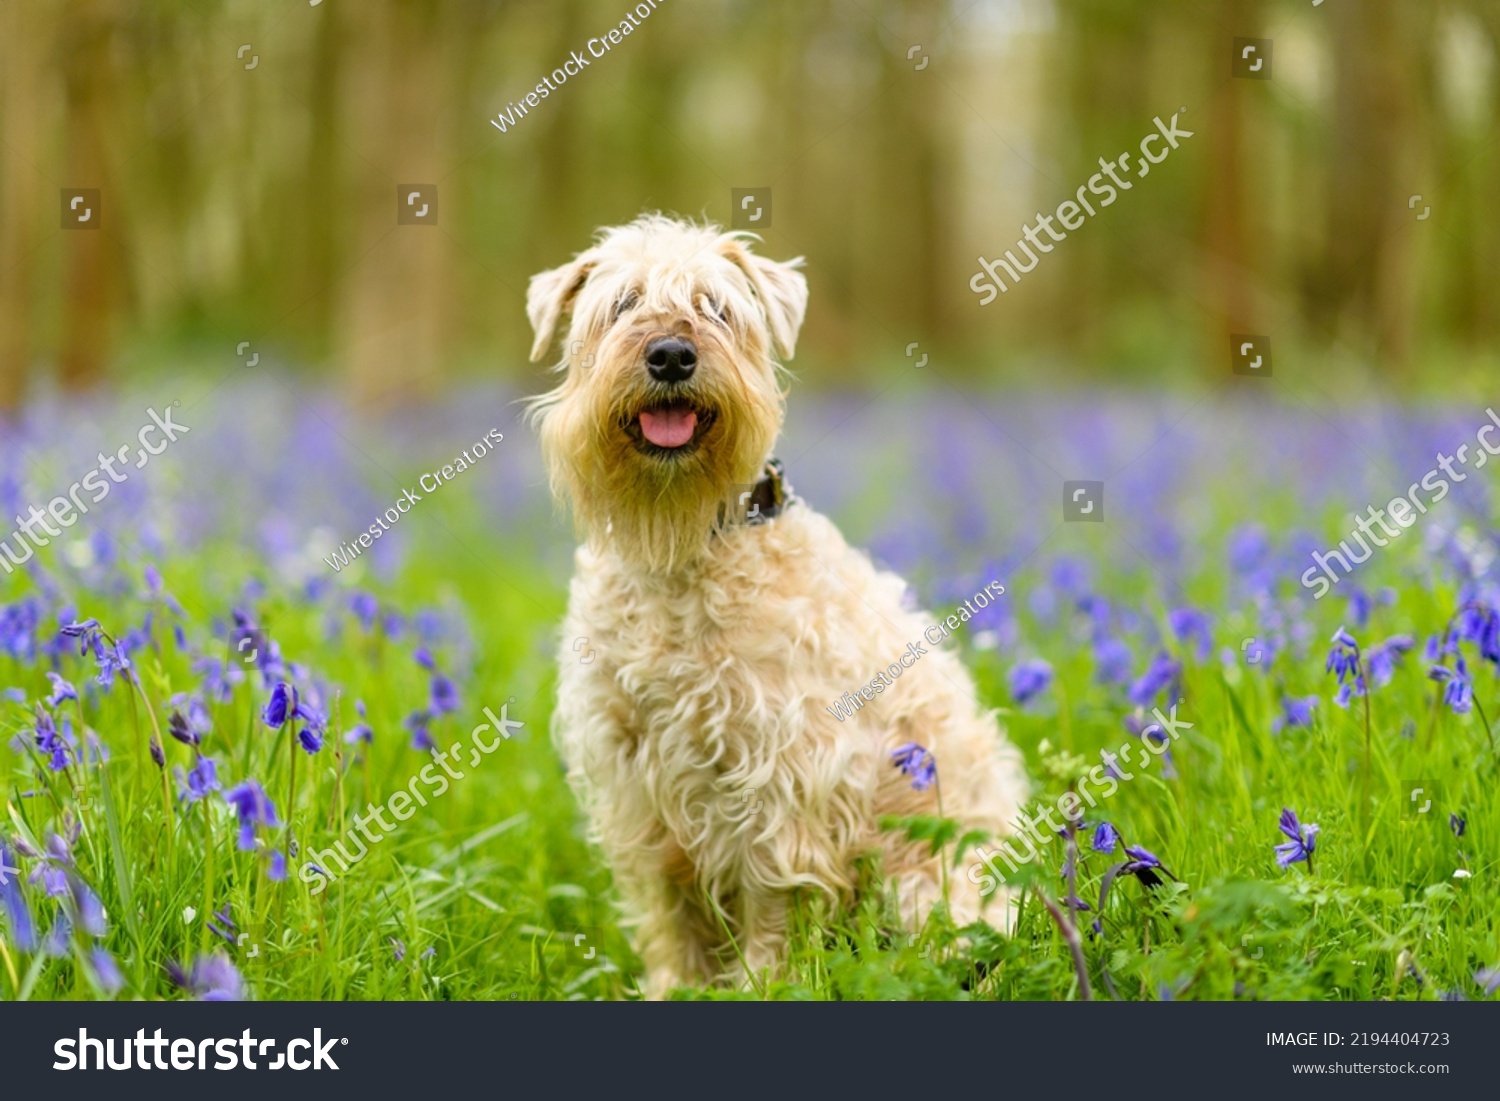 A Soft-coated Wheaten Terrier sitting in grassy ground and looking at camera #2194404723